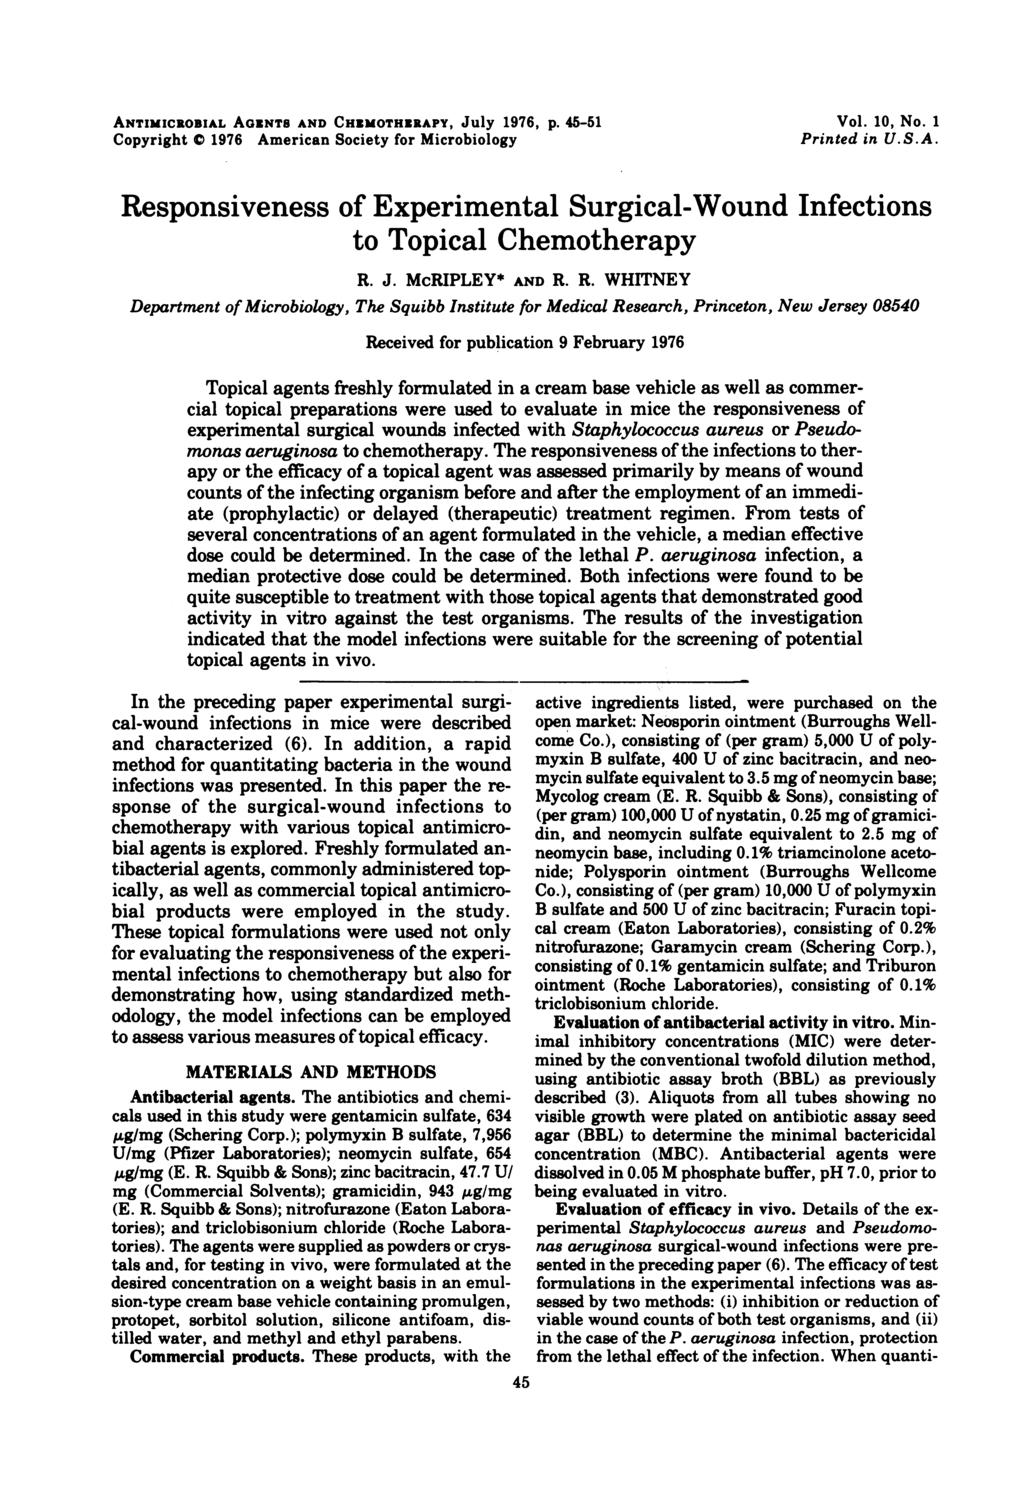 ANTIMICROBIAL AGENTS AND CHZMOTHERAPY, JUlY 1976, P. 45-51 Copyright C 1976 American Society for Microbiology Vol. 10, No. 1 Printed in U.S.A. Responsiveness of Experimental Surgical-Wound Infections to Topical Chemotherapy R.